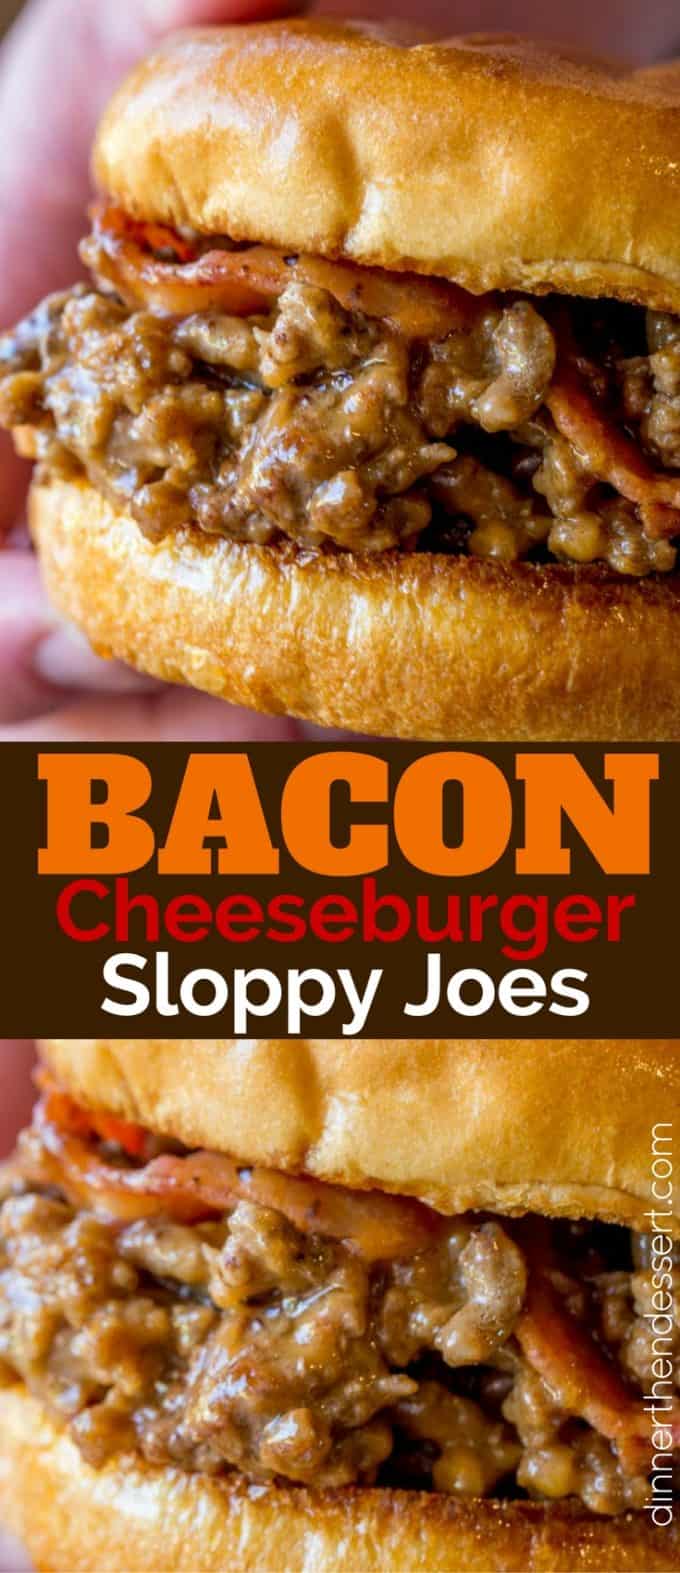 We loved these Bacon Cheeseburger Sloppy Joes so much we made them again the next day!